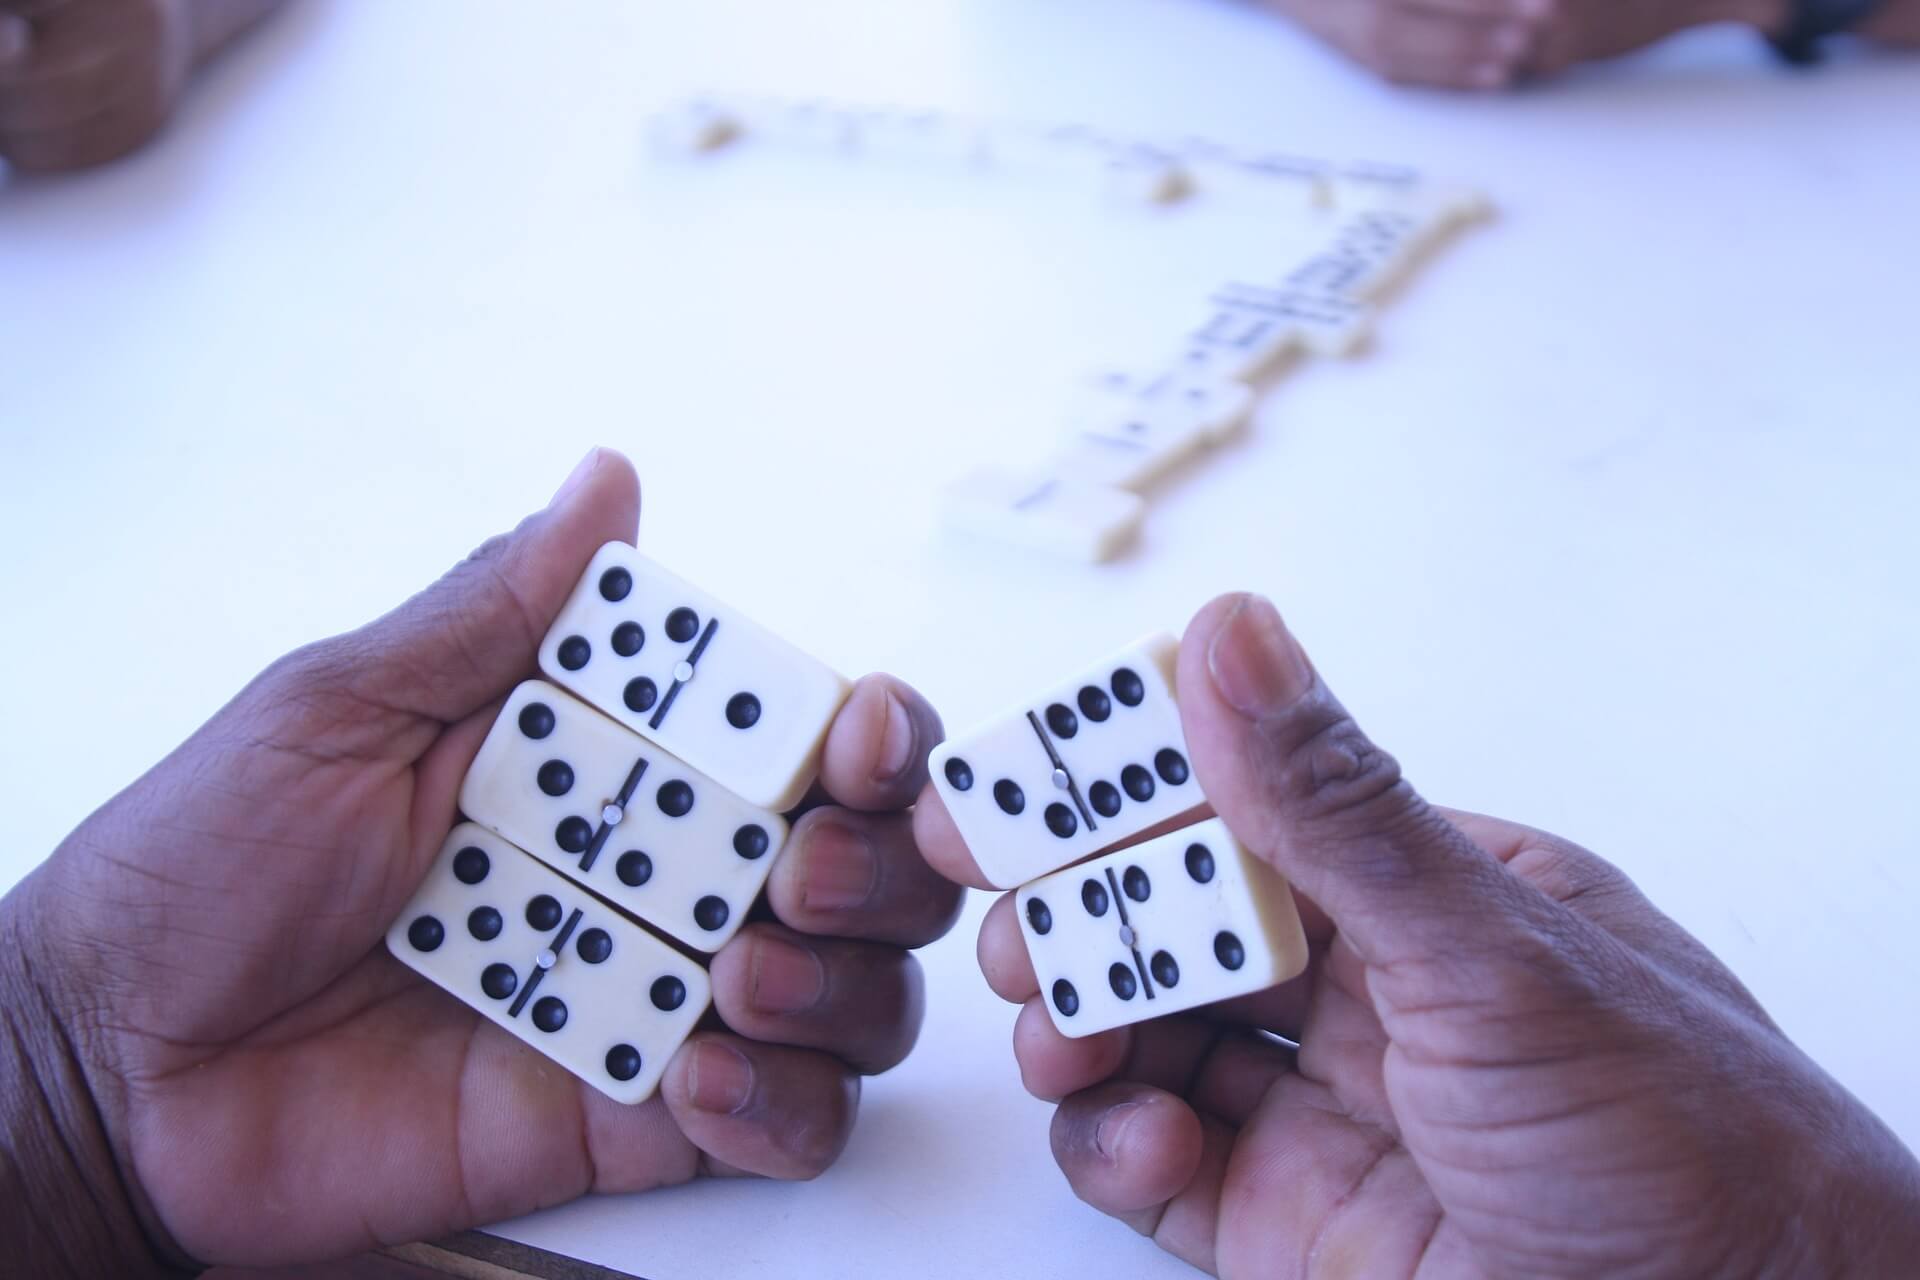 official-domino-rules-learn-how-to-play-dominoes